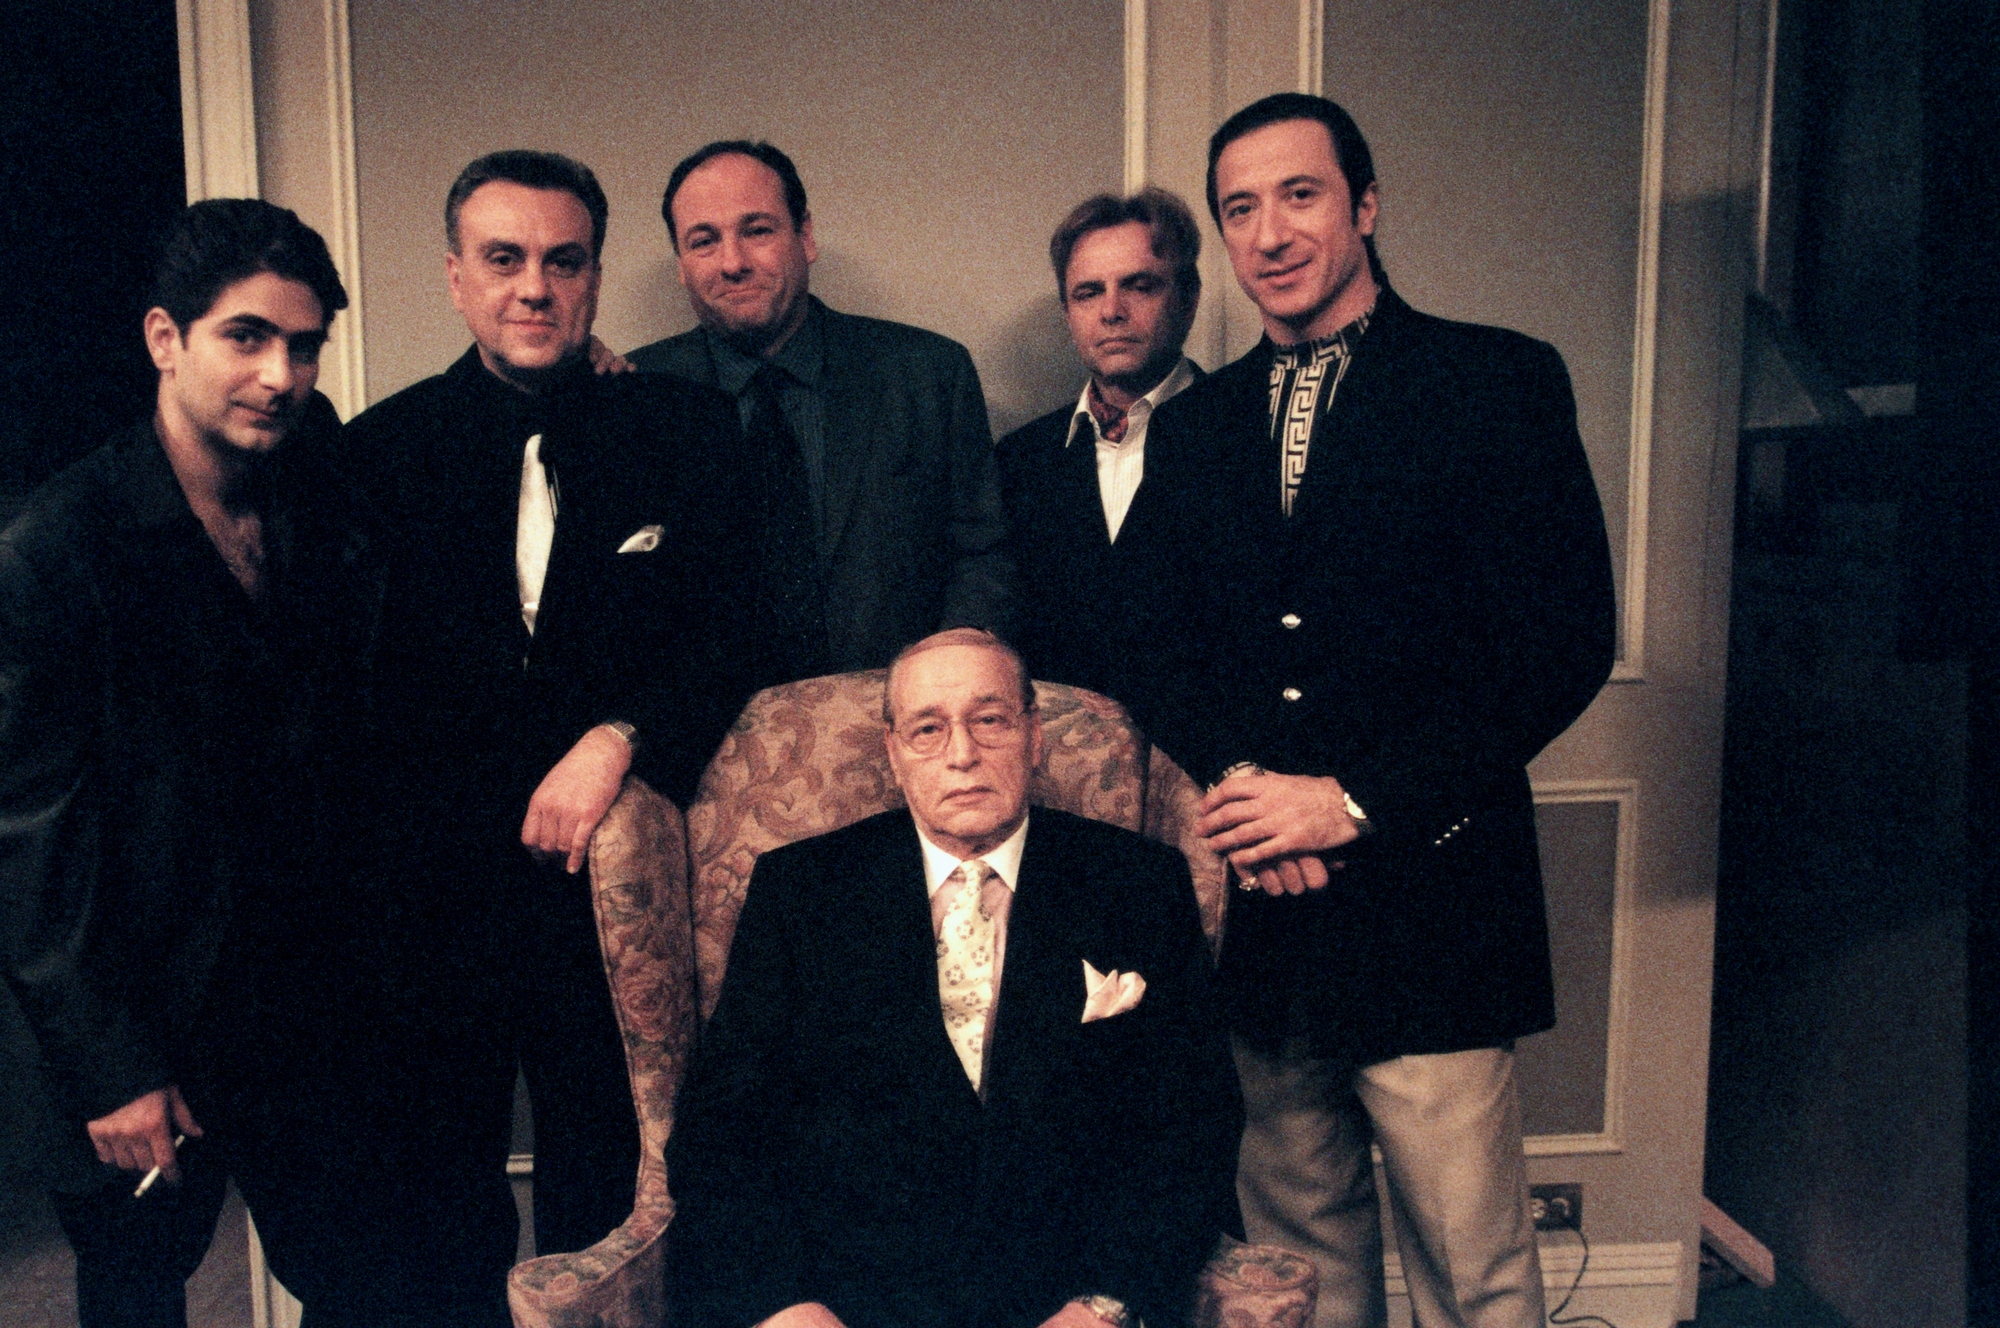 https://vignette.wikia.nocookie.net/sopranos/images/4/4b/-home-hbo-www-uploads-dimension-500x375-the_sopranos_s401_for_all_debts_public_and_private_11211_65.jpg/revision/latest?cb=20130813165341